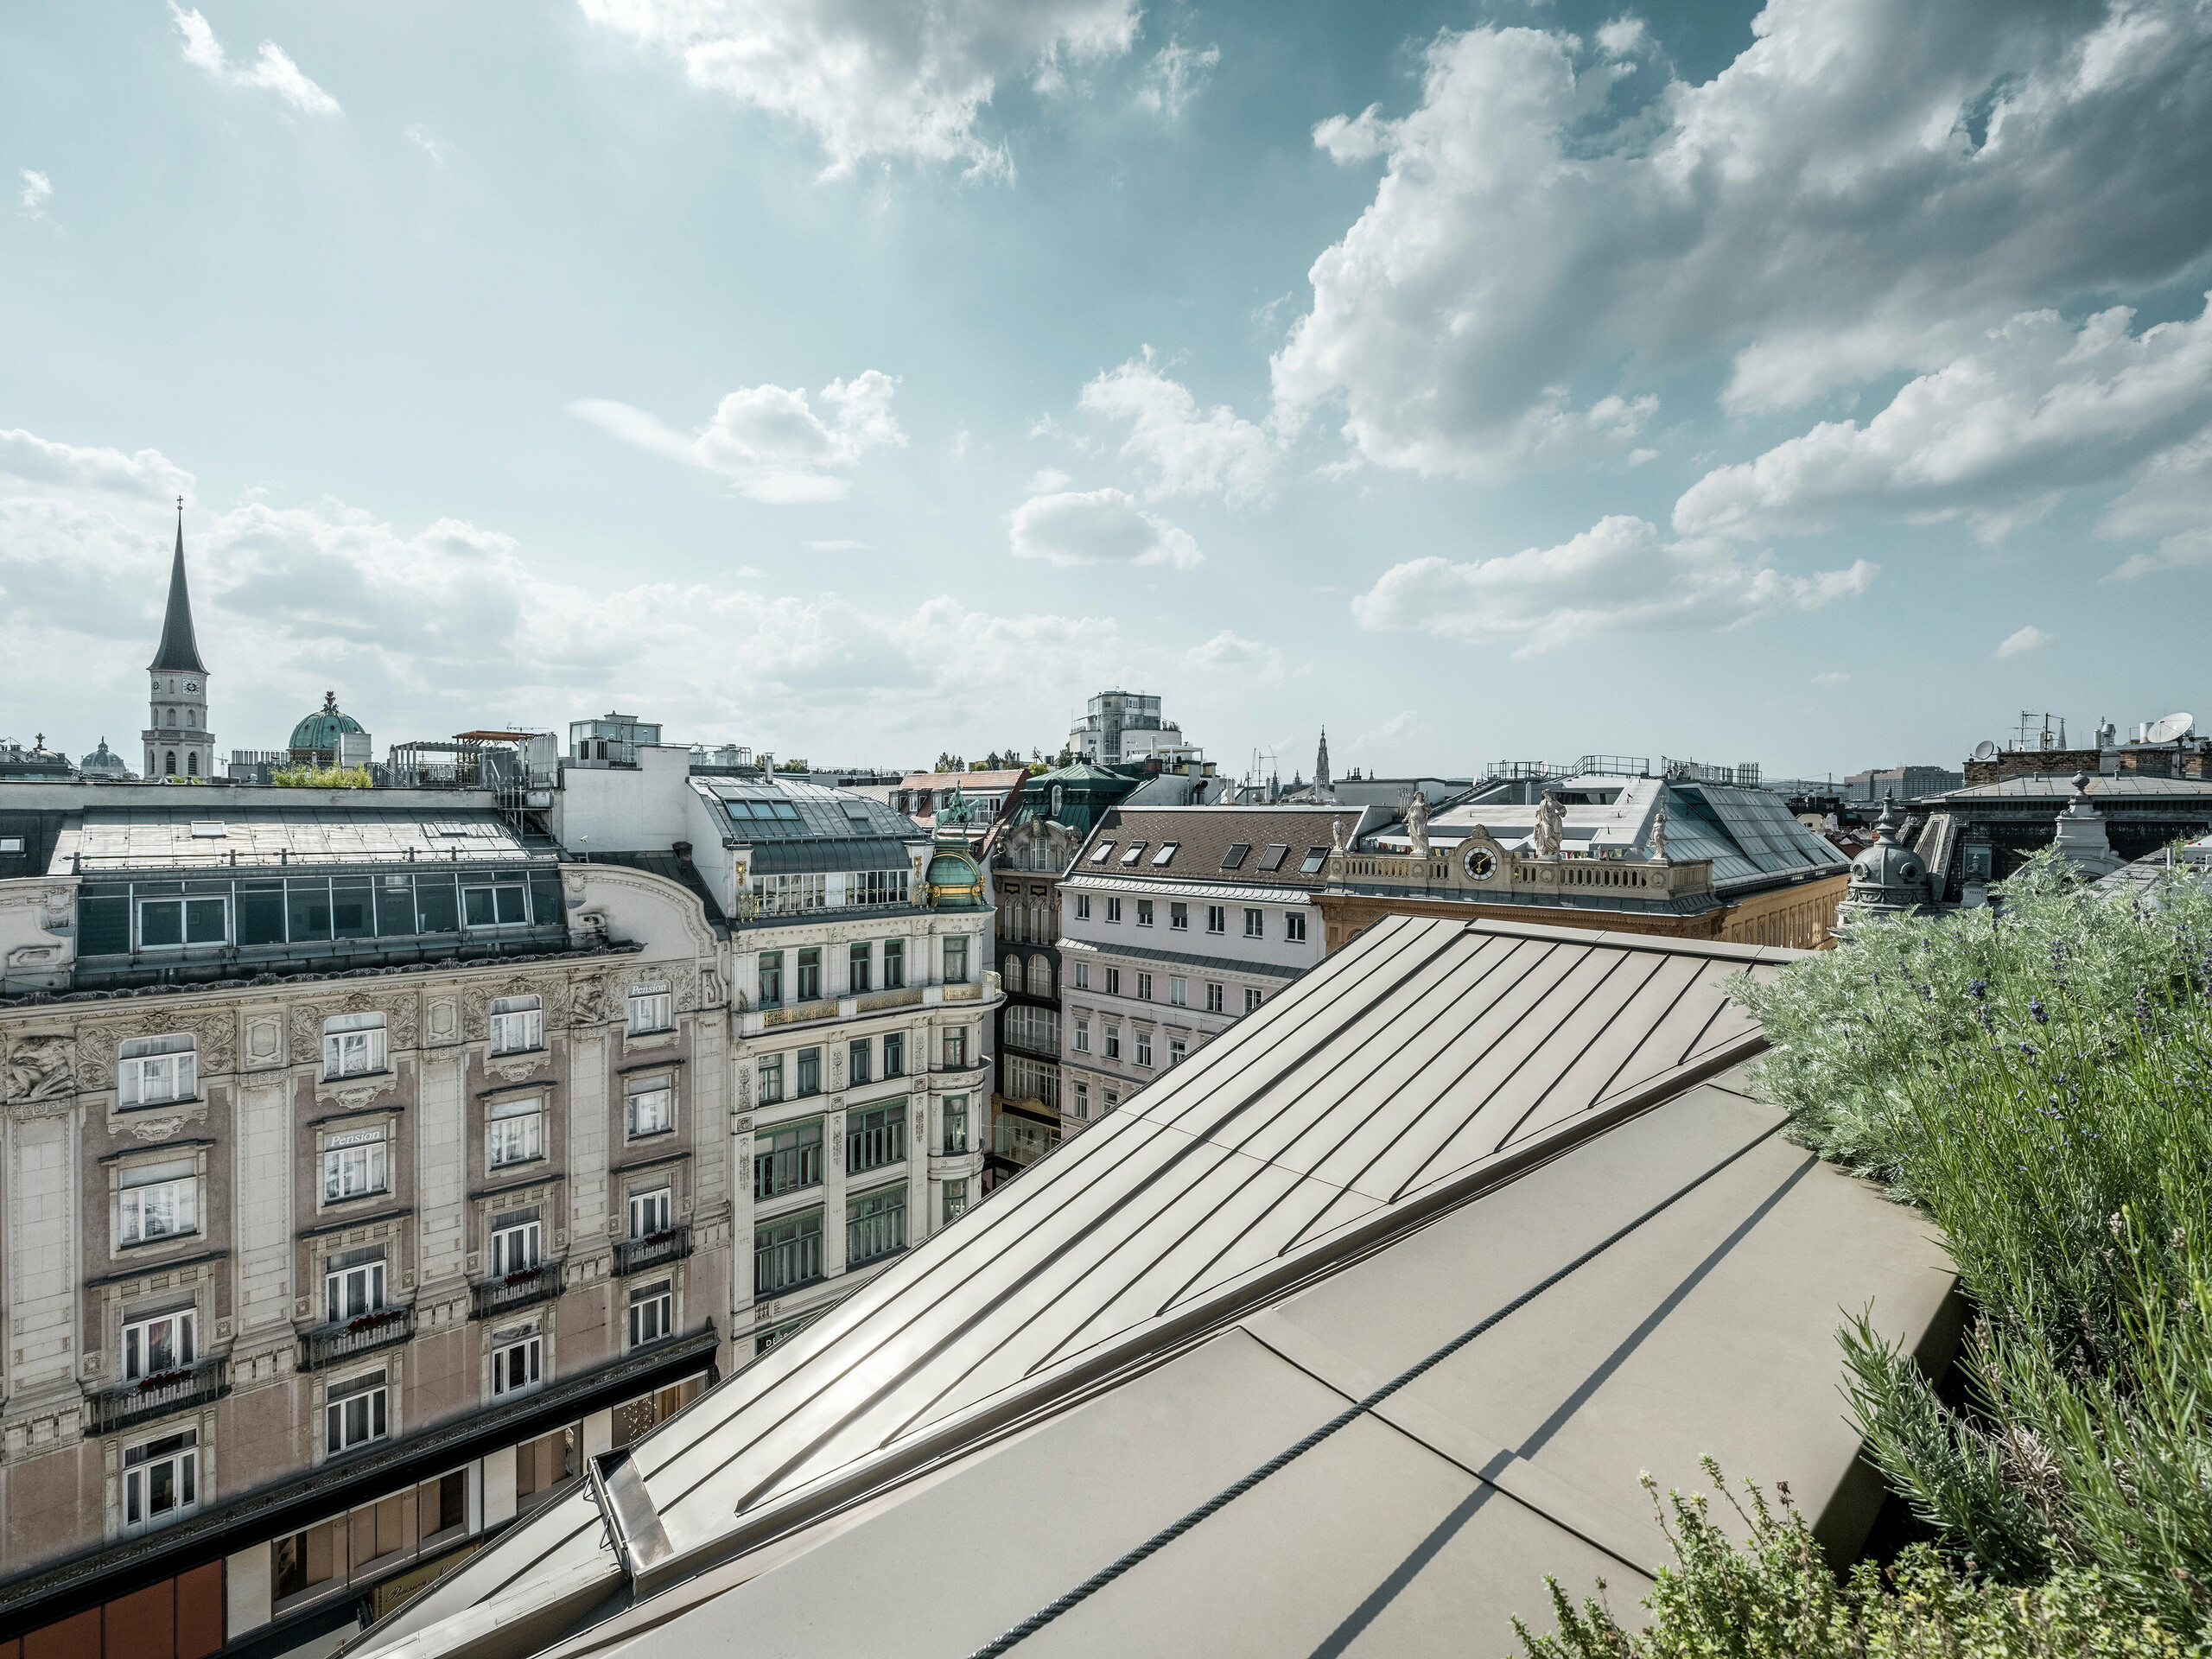 A sweeping view of the roofs of Vienna, in the right of the picture Prefalz sheets, right next to them greenery.